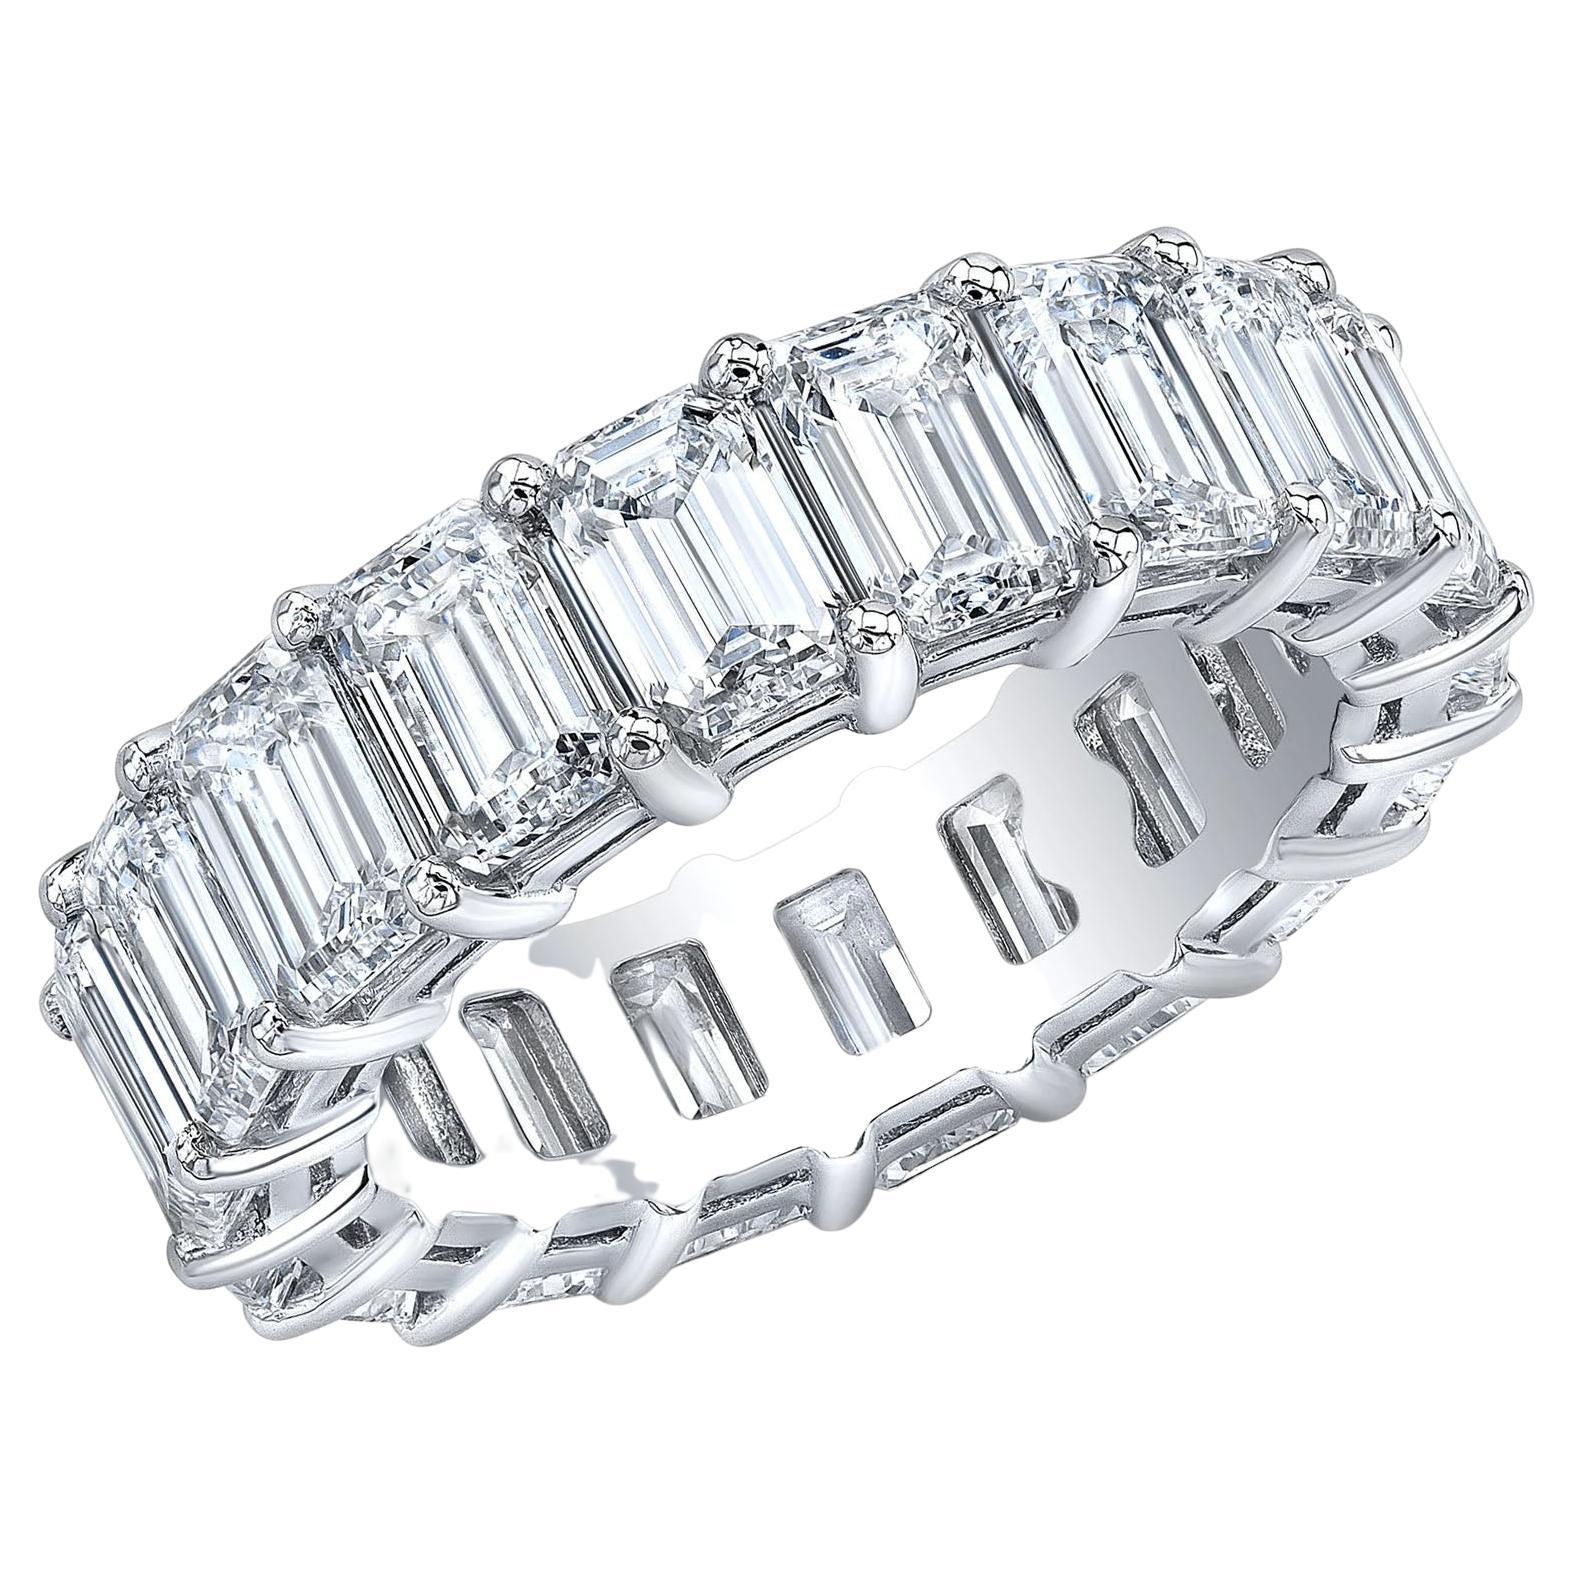 For Sale:  8.00 Carat Shared Prong Emerald Cut Diamond Eternity Ring G Color / VS1 18K Gold